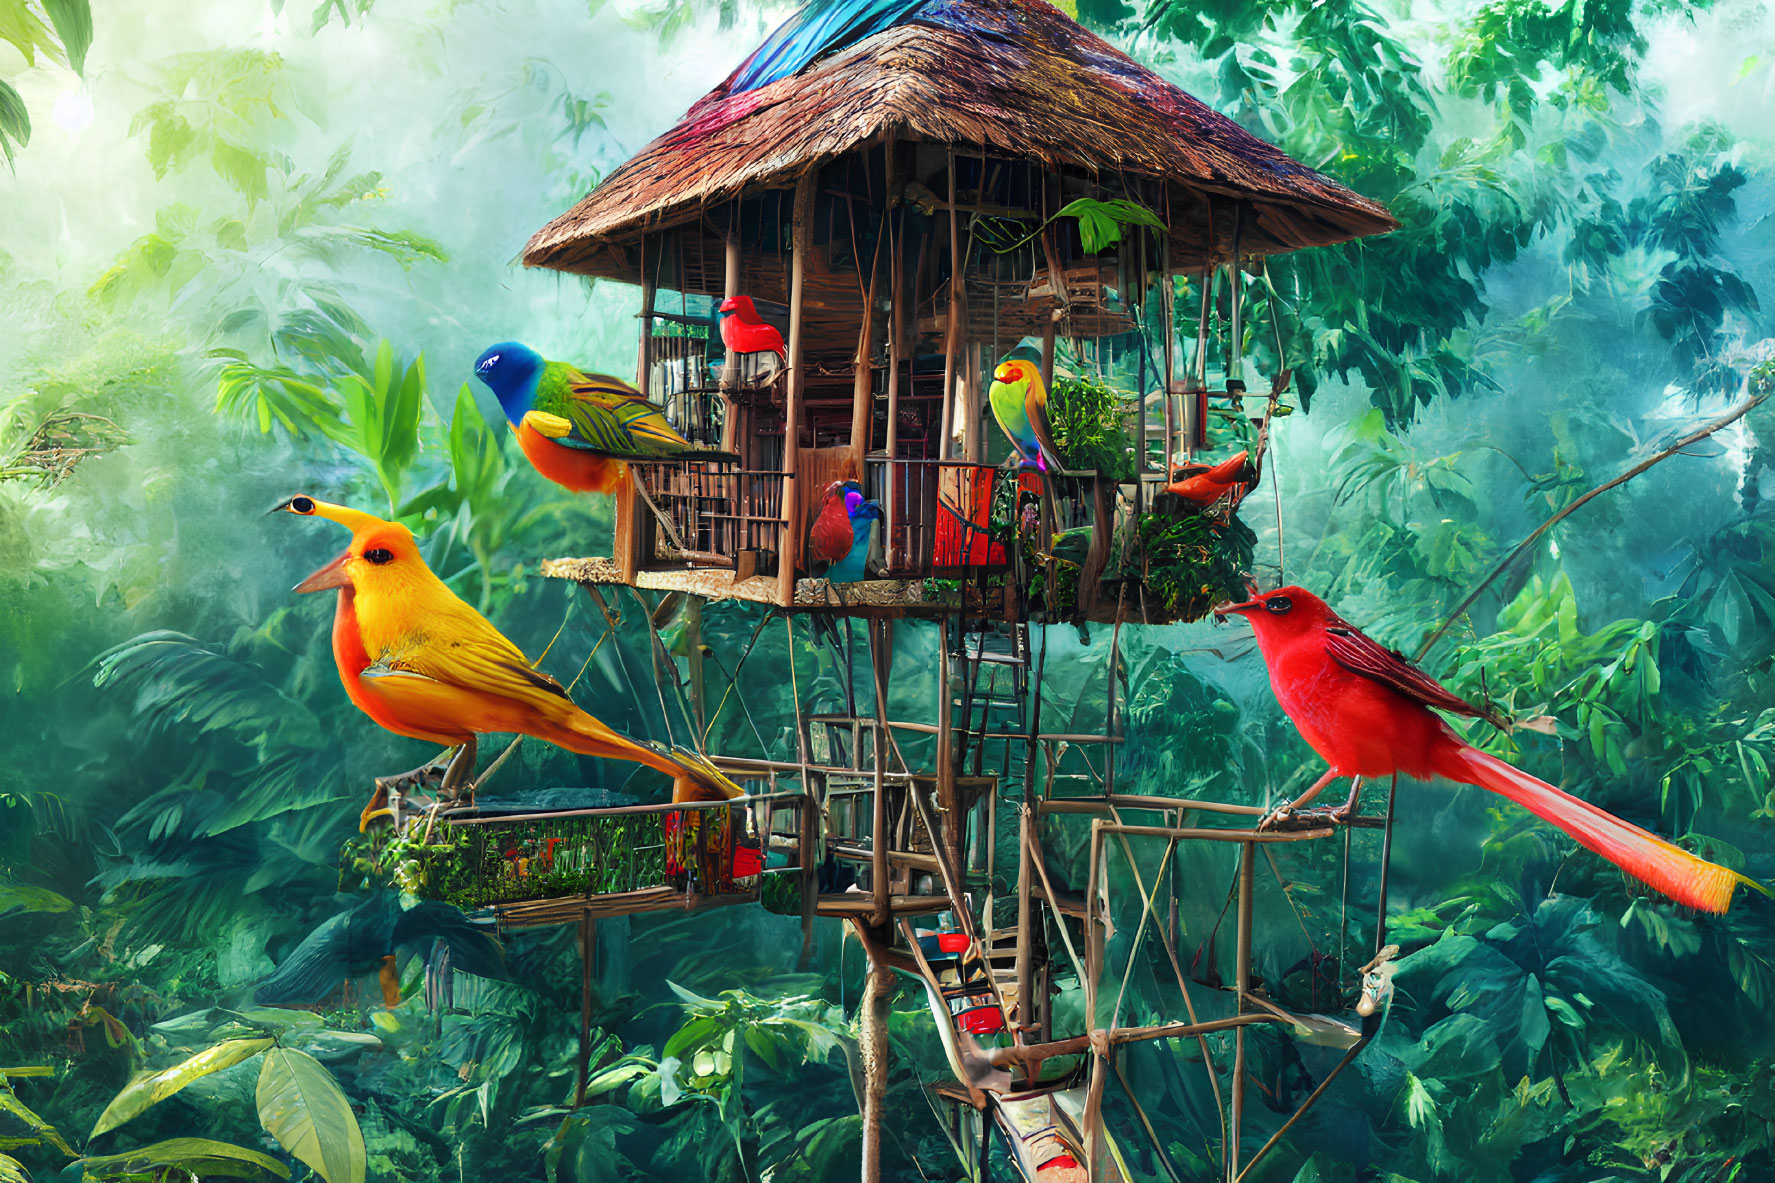 Vibrant Bamboo Treehouse with Oversized Birds in Lush Jungle